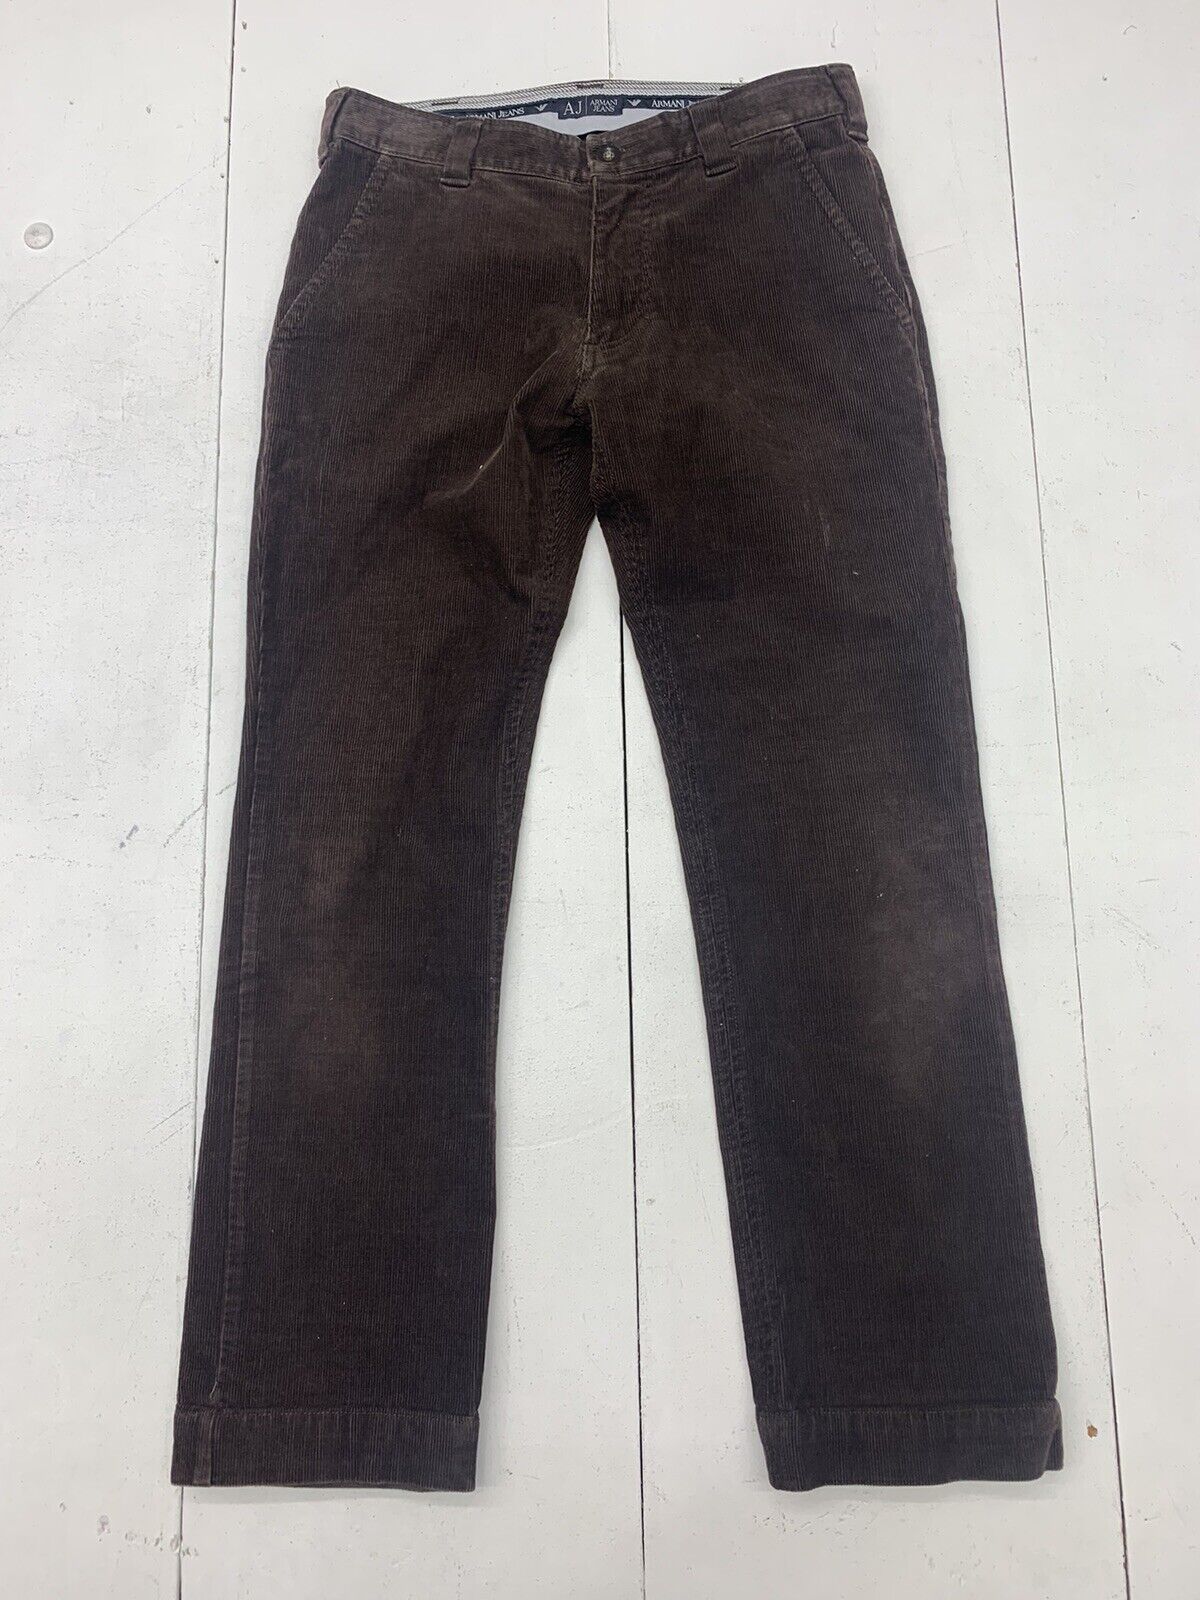 Armani Mens Brown Textured Jeans Size 28